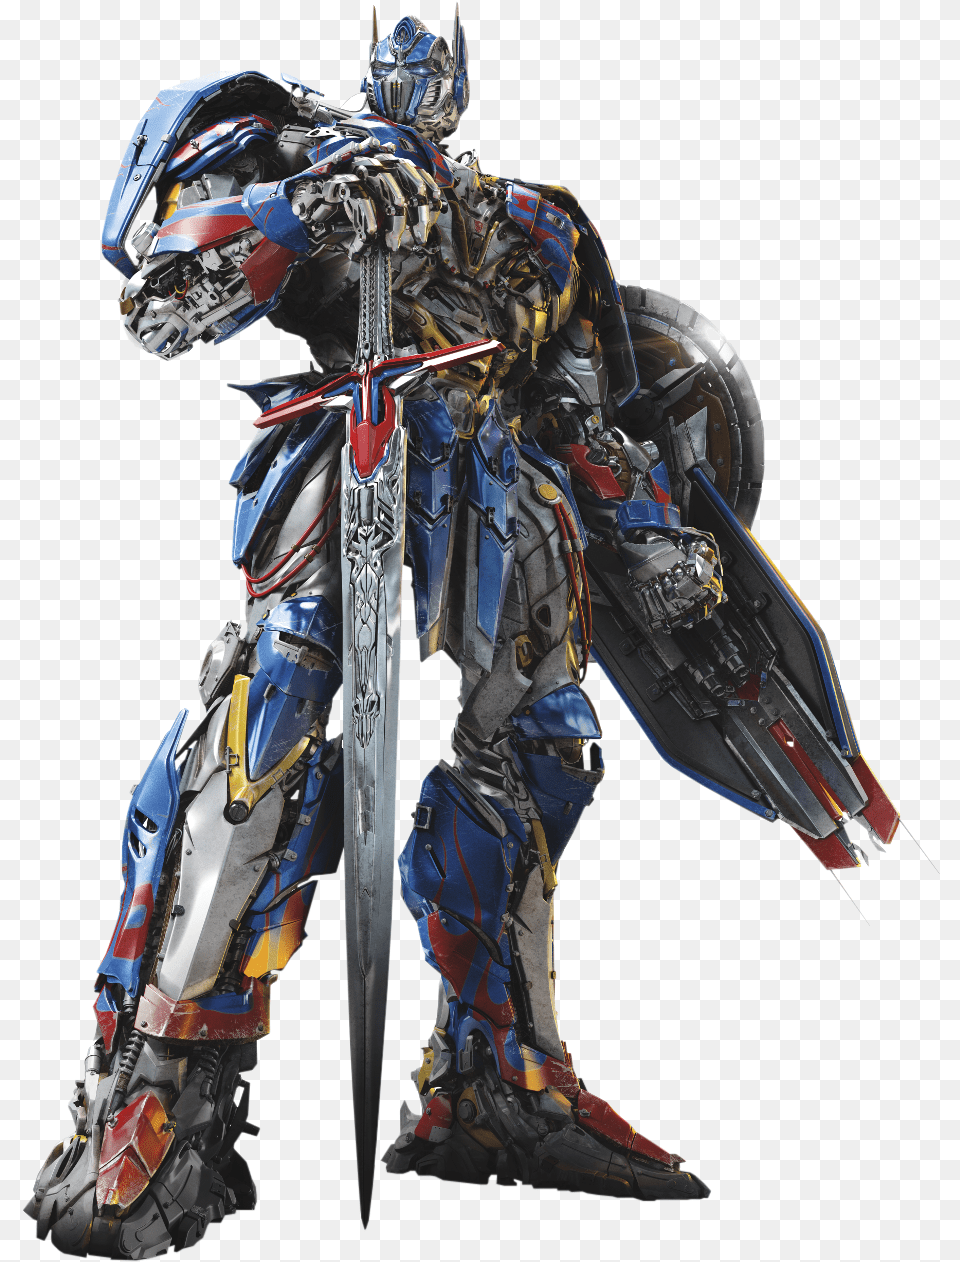 Transformers The Last Knight, Person, Machine, Wheel, Adult Png